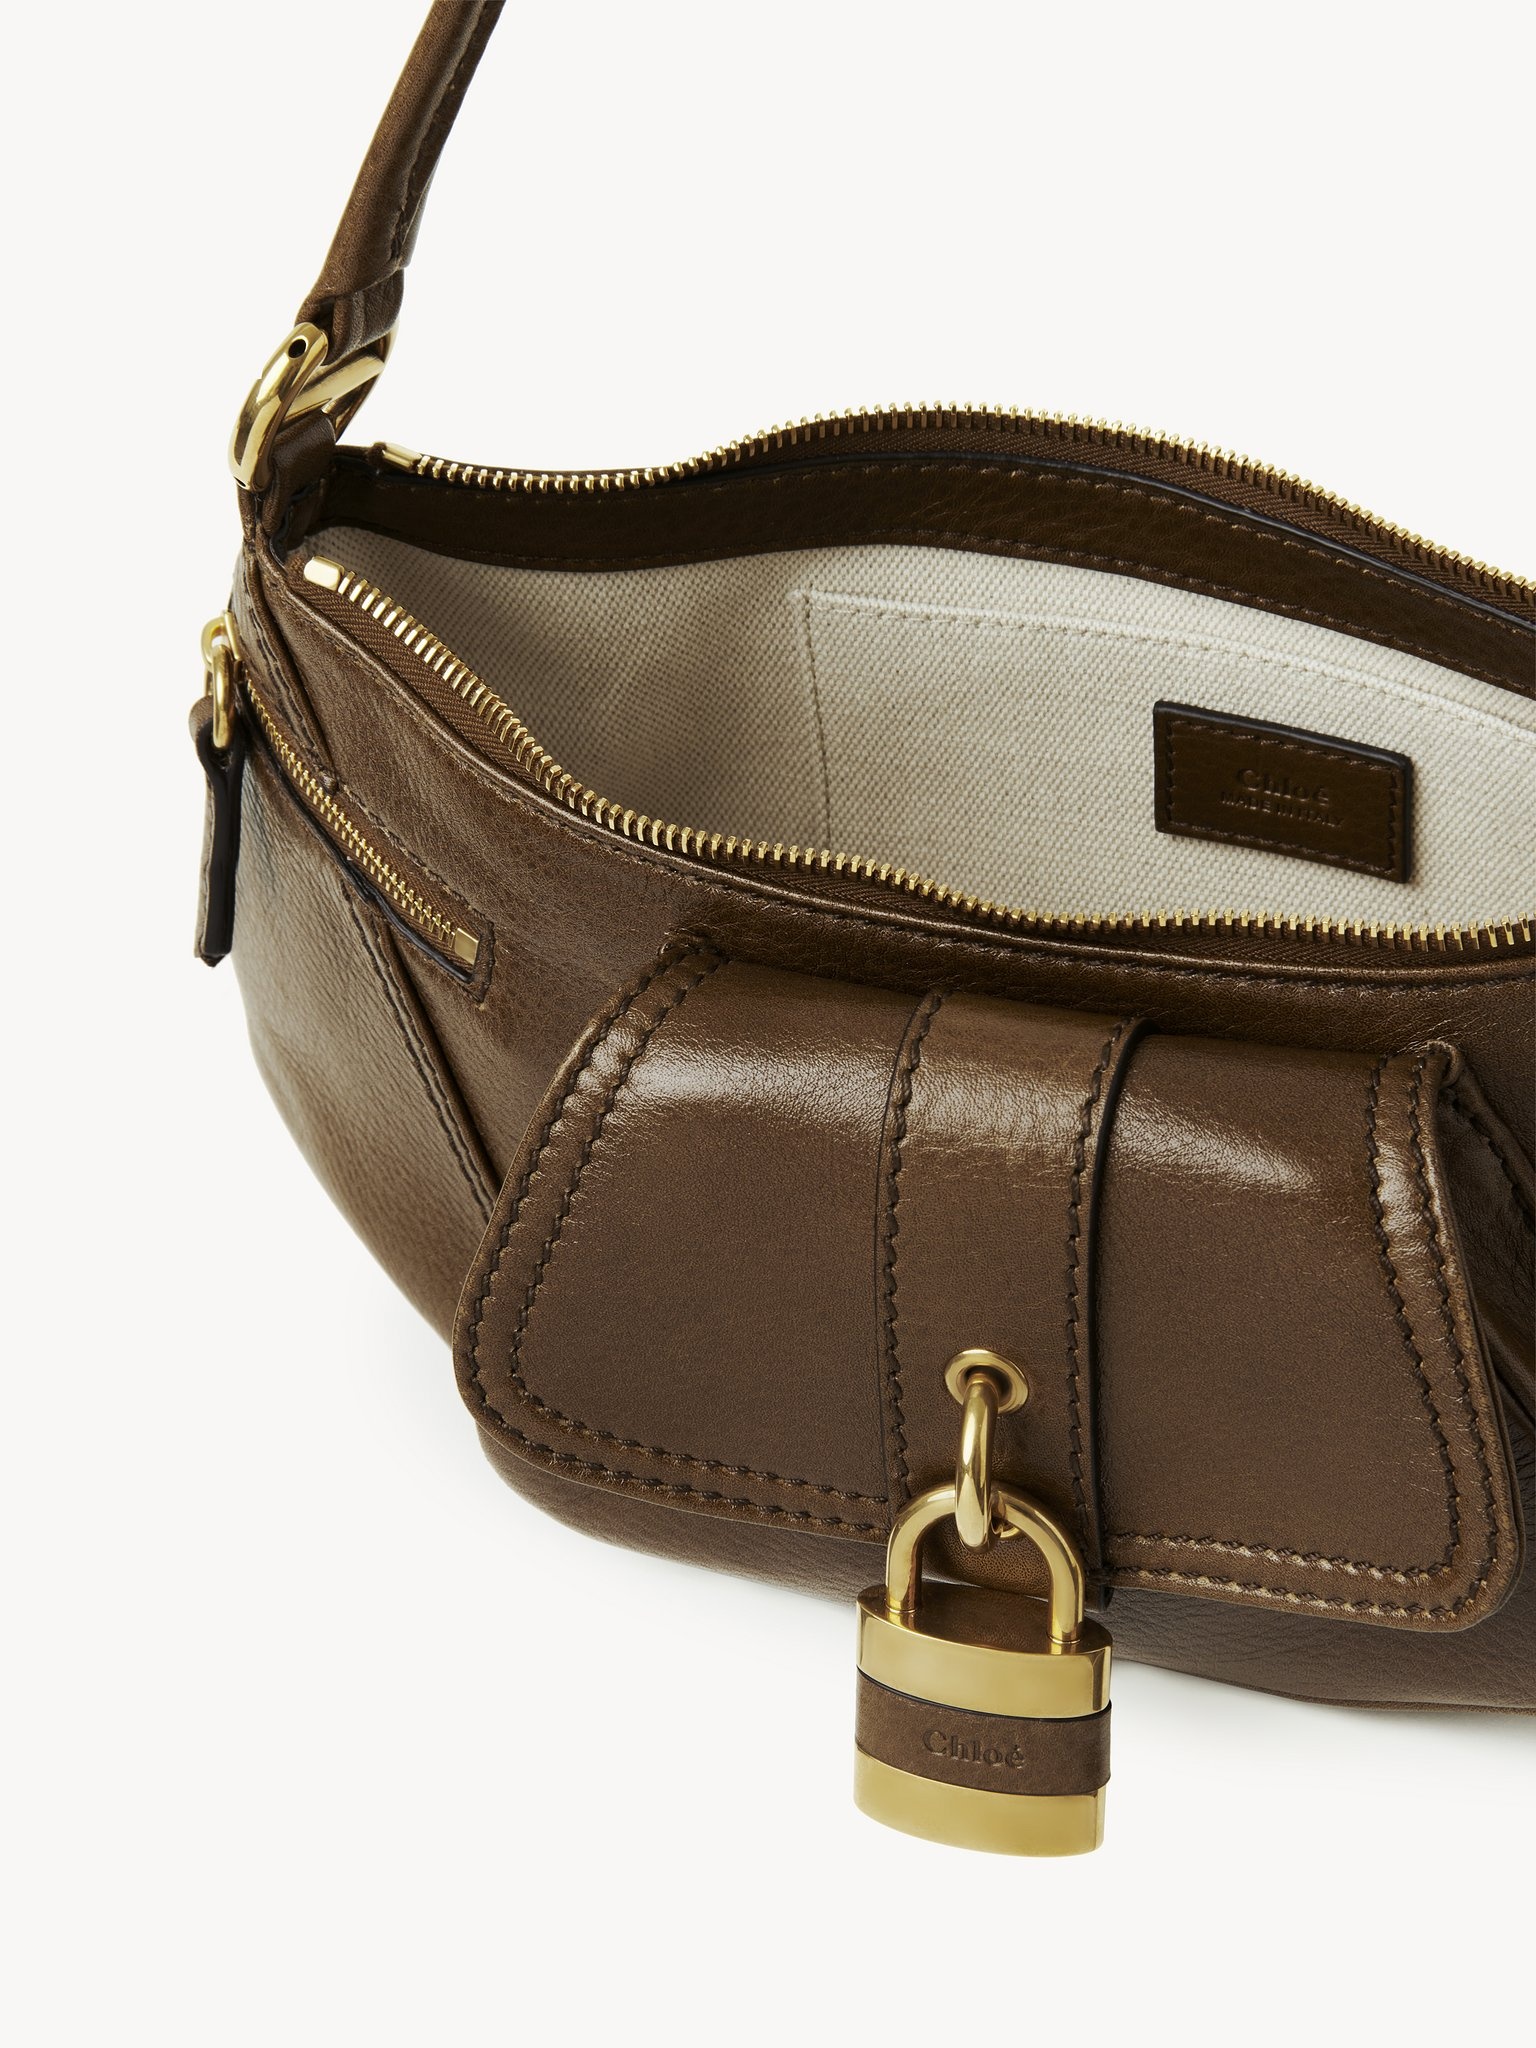 THE 99 SHOULDER BAG IN GRAINED LEATHER - 5